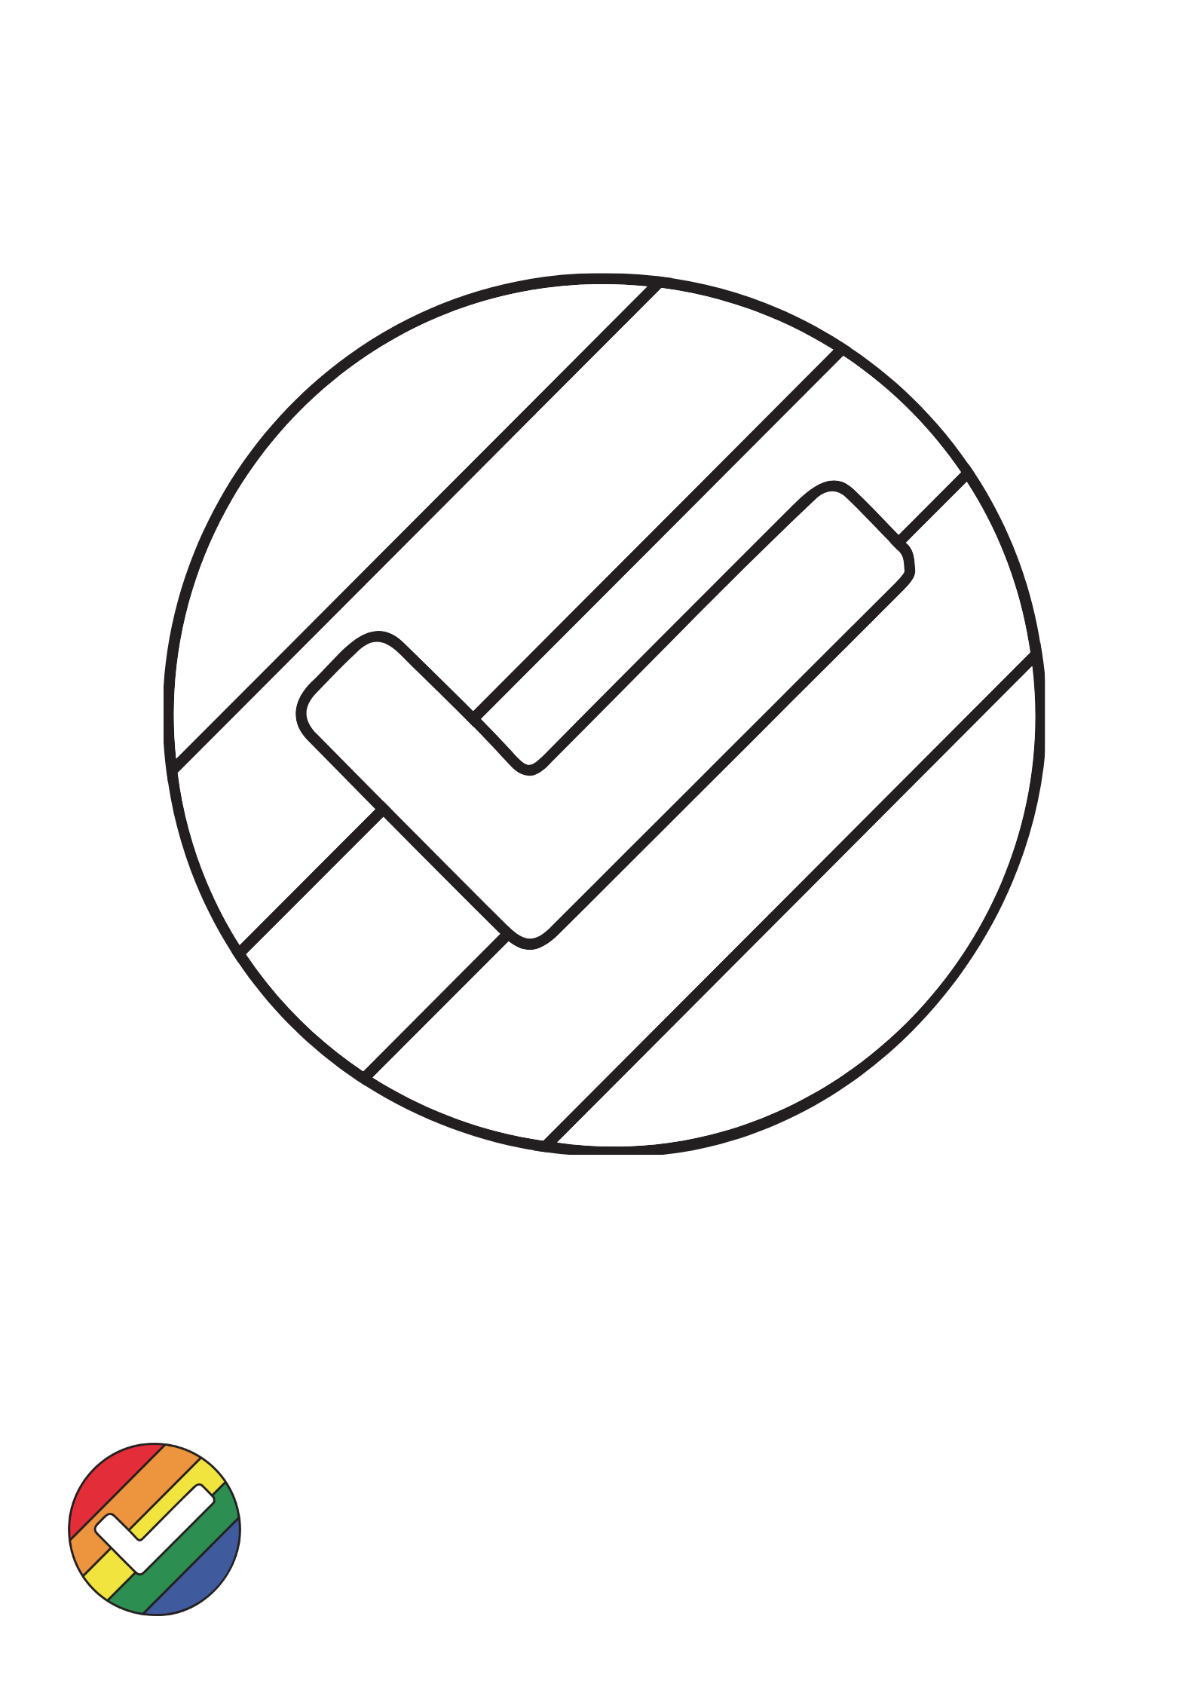 Rainbow Check Mark coloring page